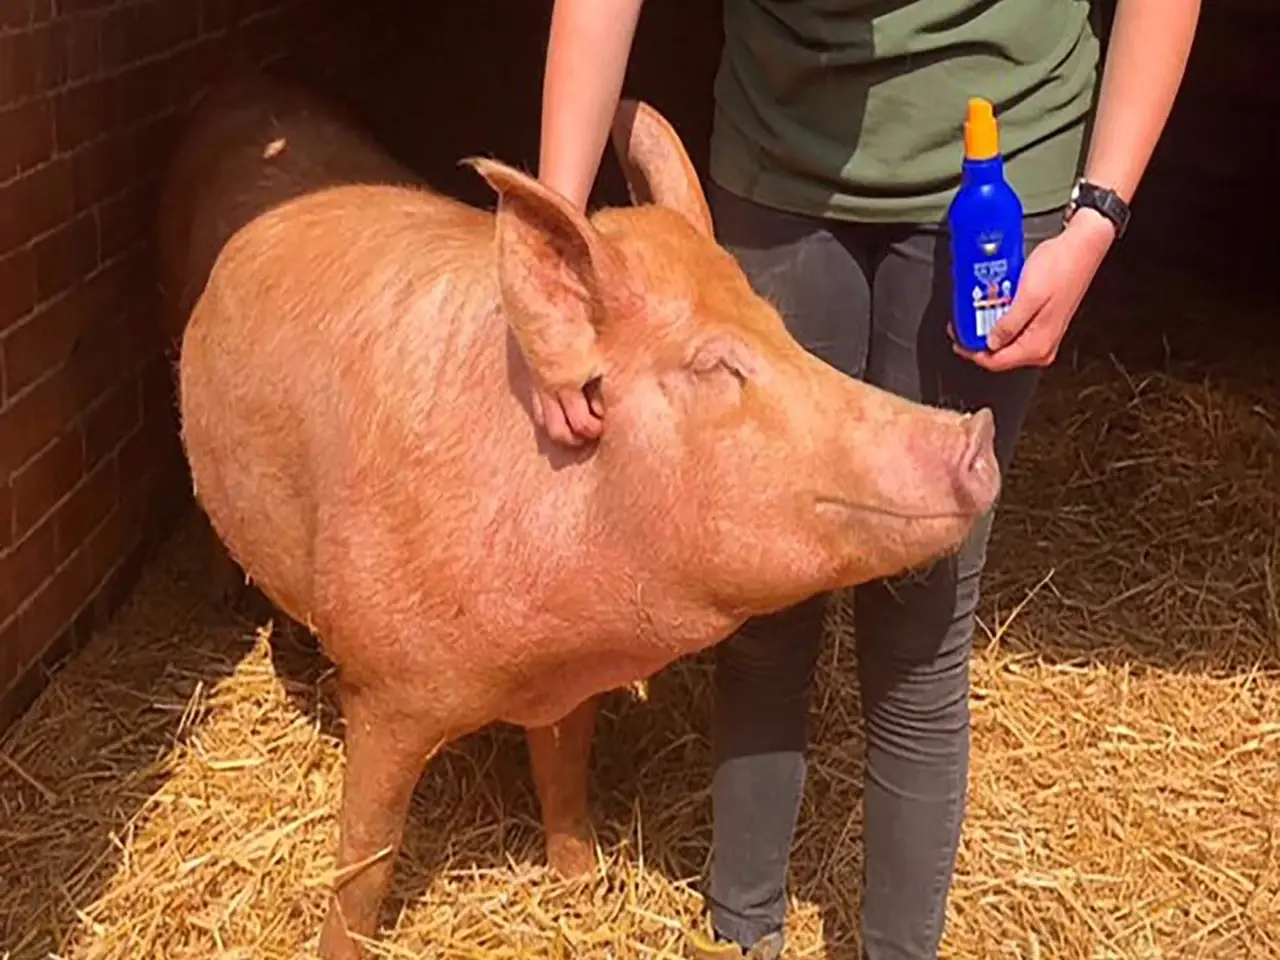 Some farmers and farm owners have shared photos of the pigs covered in sunscreen